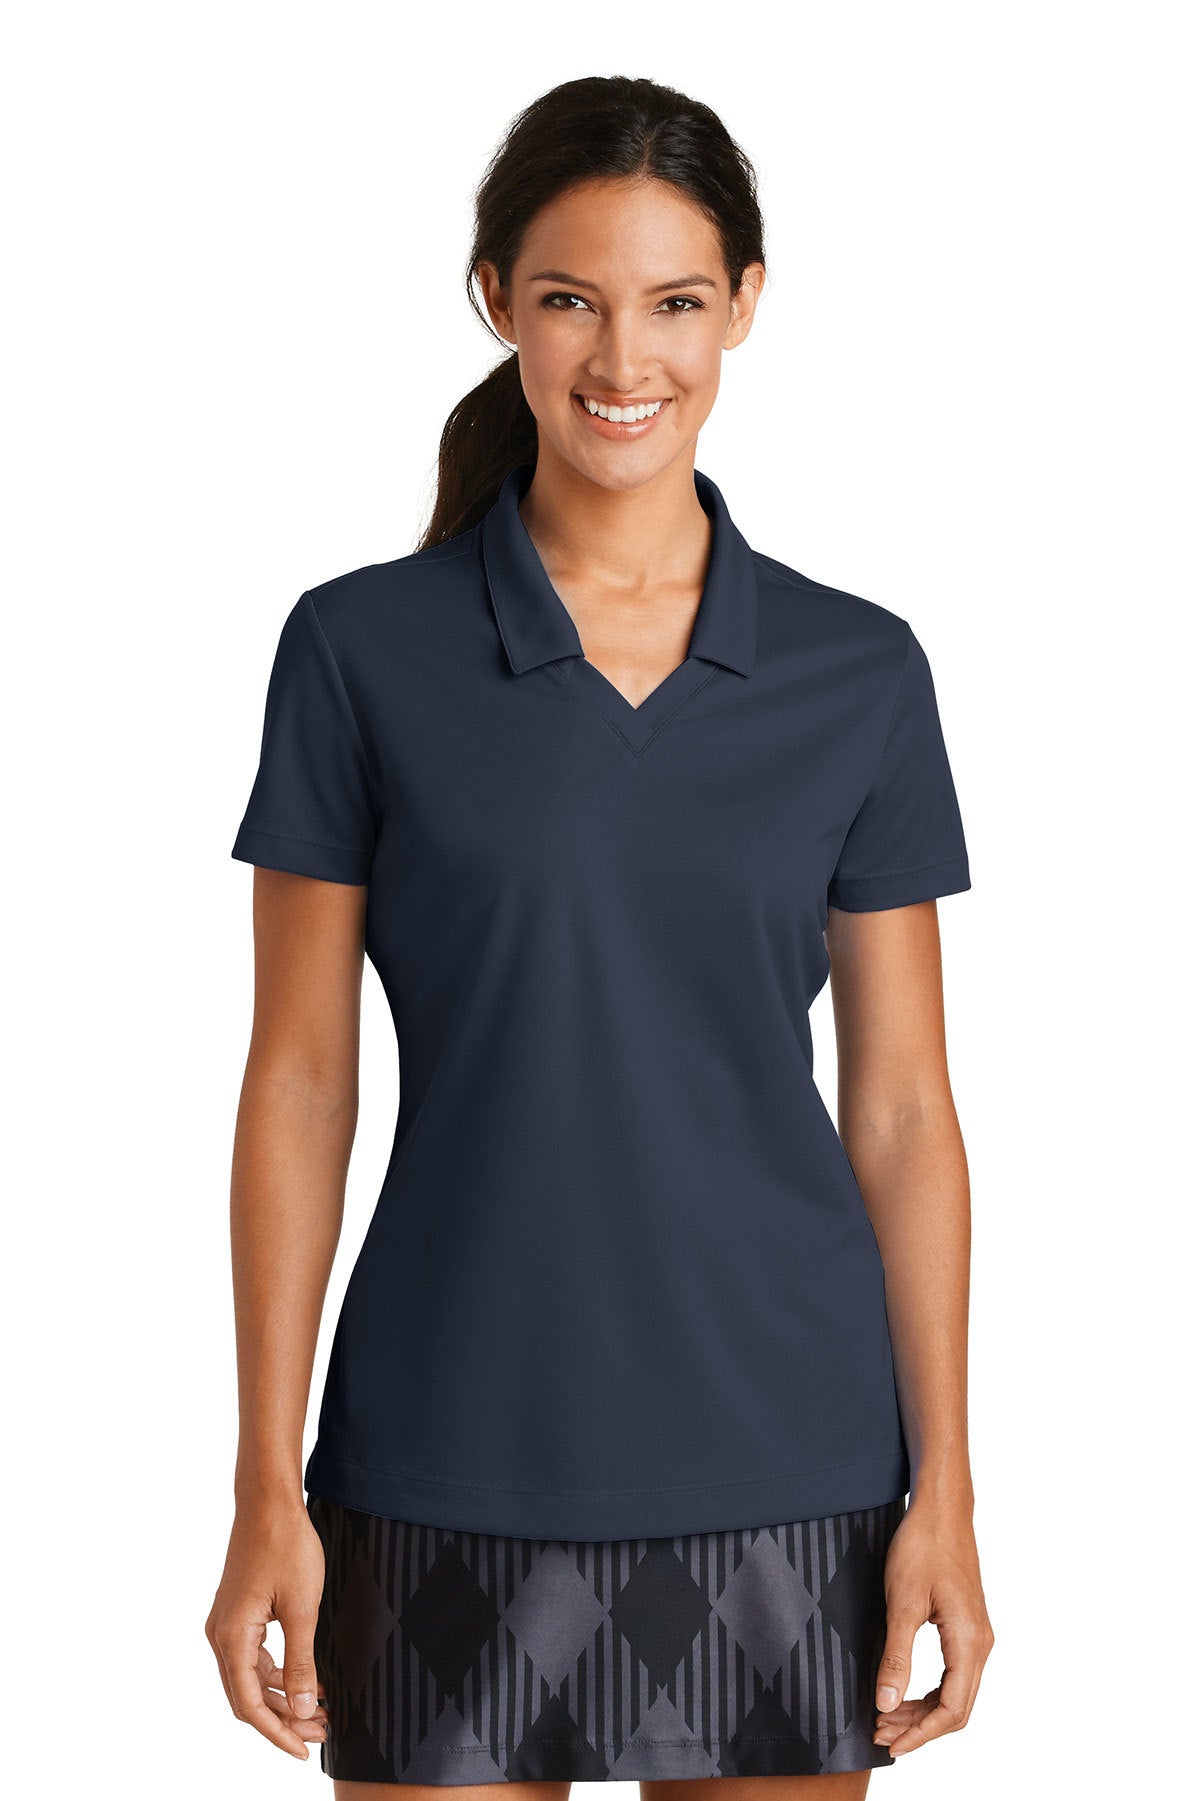 LL Two Oars (Embroidered) Nike Women's Golf Polo